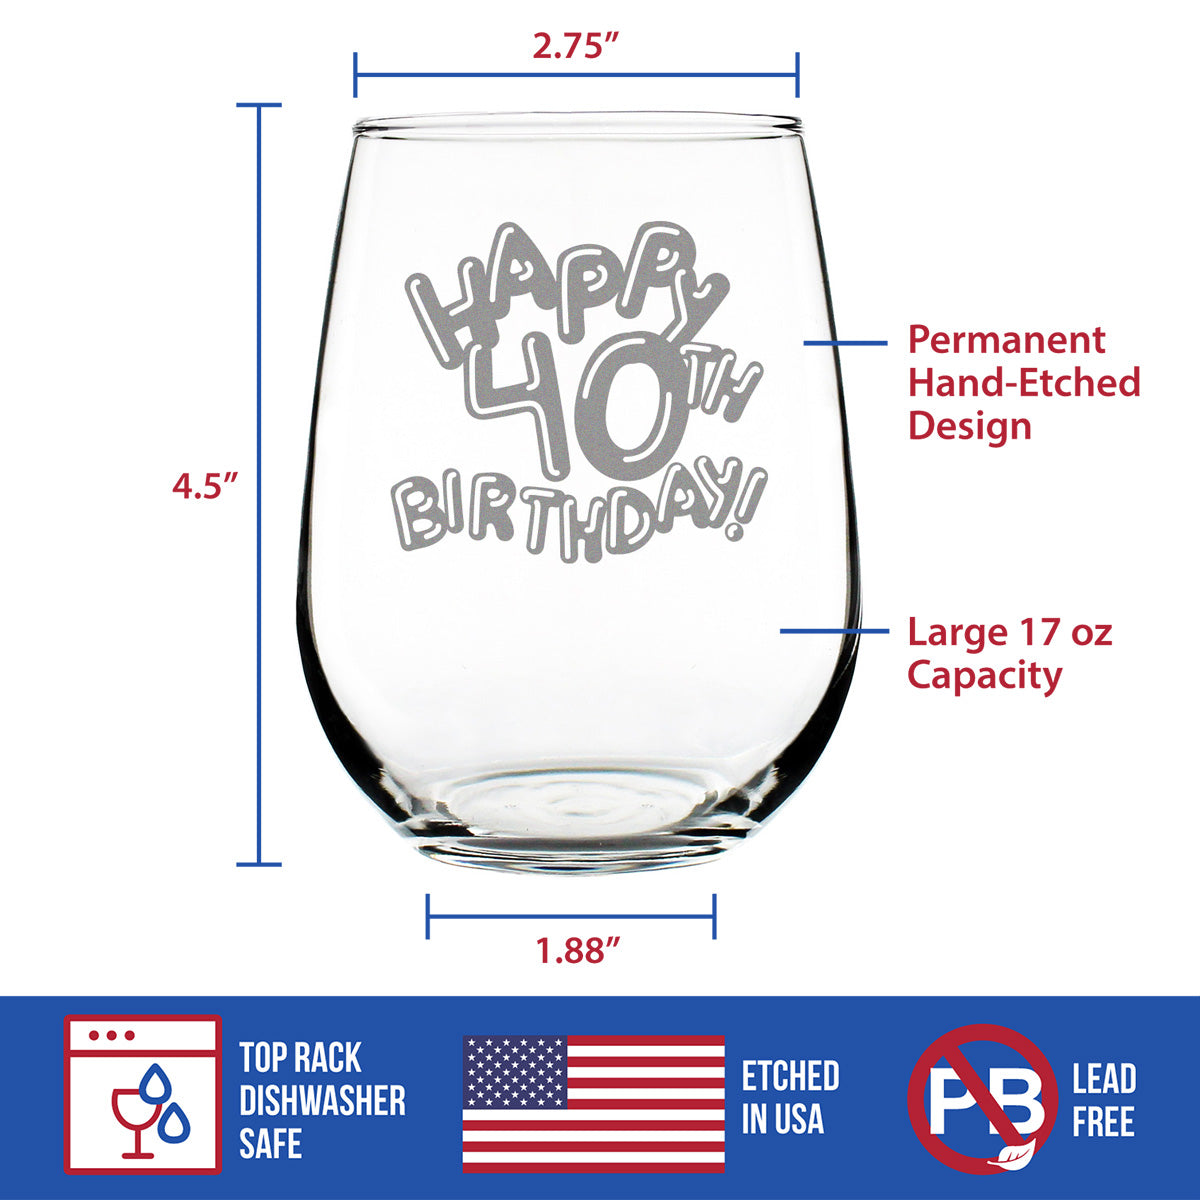 Happy 40th Birthday Balloons - Stemless Wine Glass Gifts for Women &amp; Men Turning 40 - Bday Party Decor - Large Glasses 17 Oz